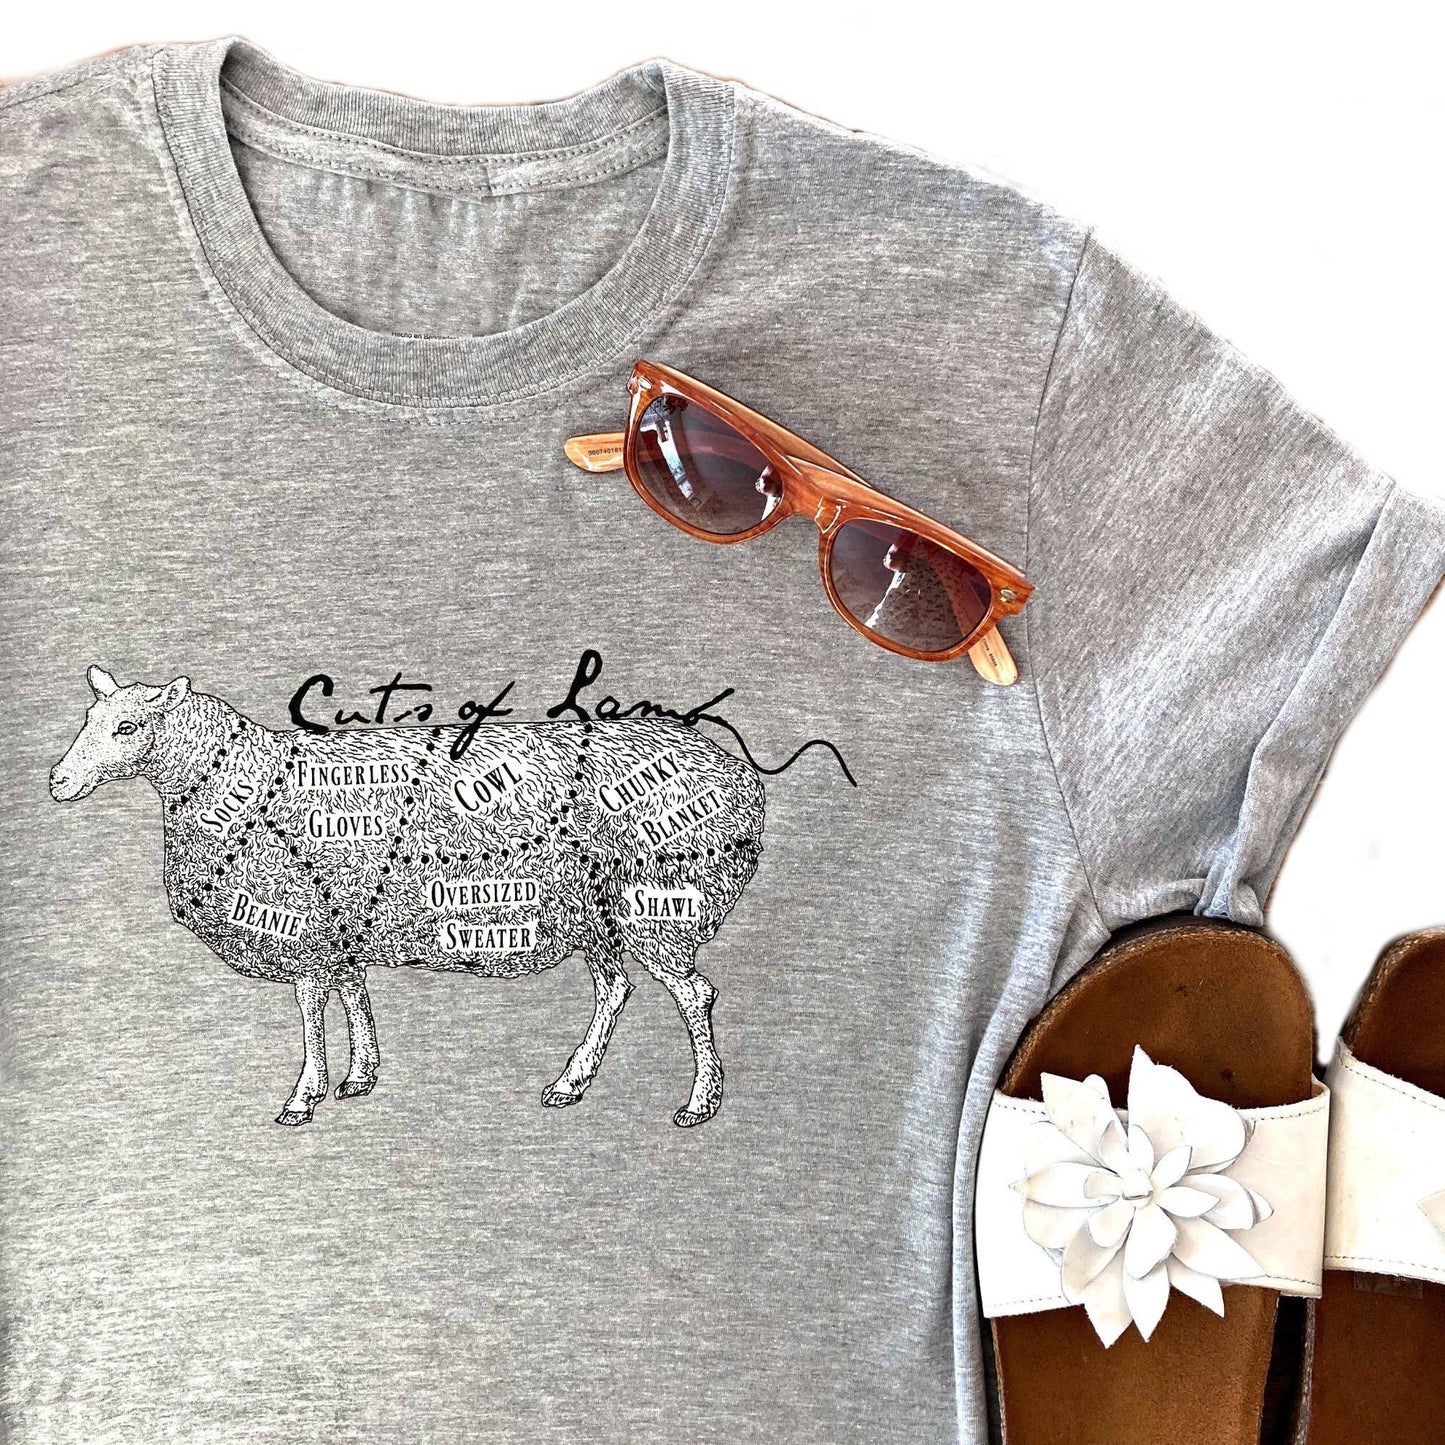 Cuts of Lamb T Shirt by Firefly Notes